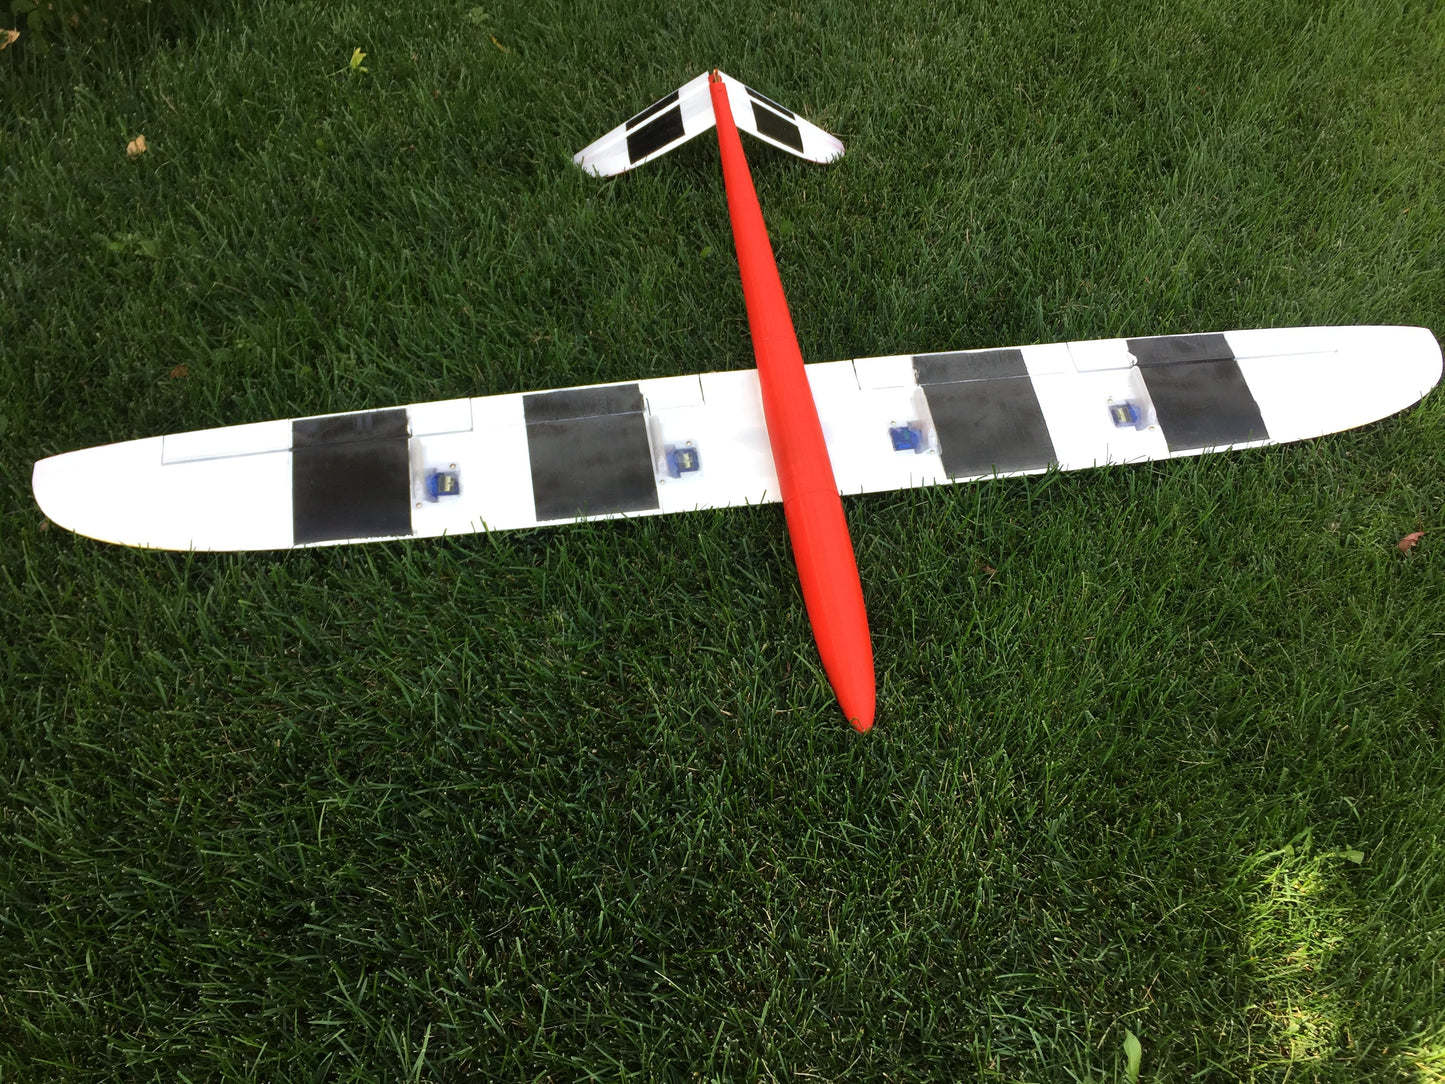 Wing 1200mm 4 Servo (Flaps) - MH32 Airfoil